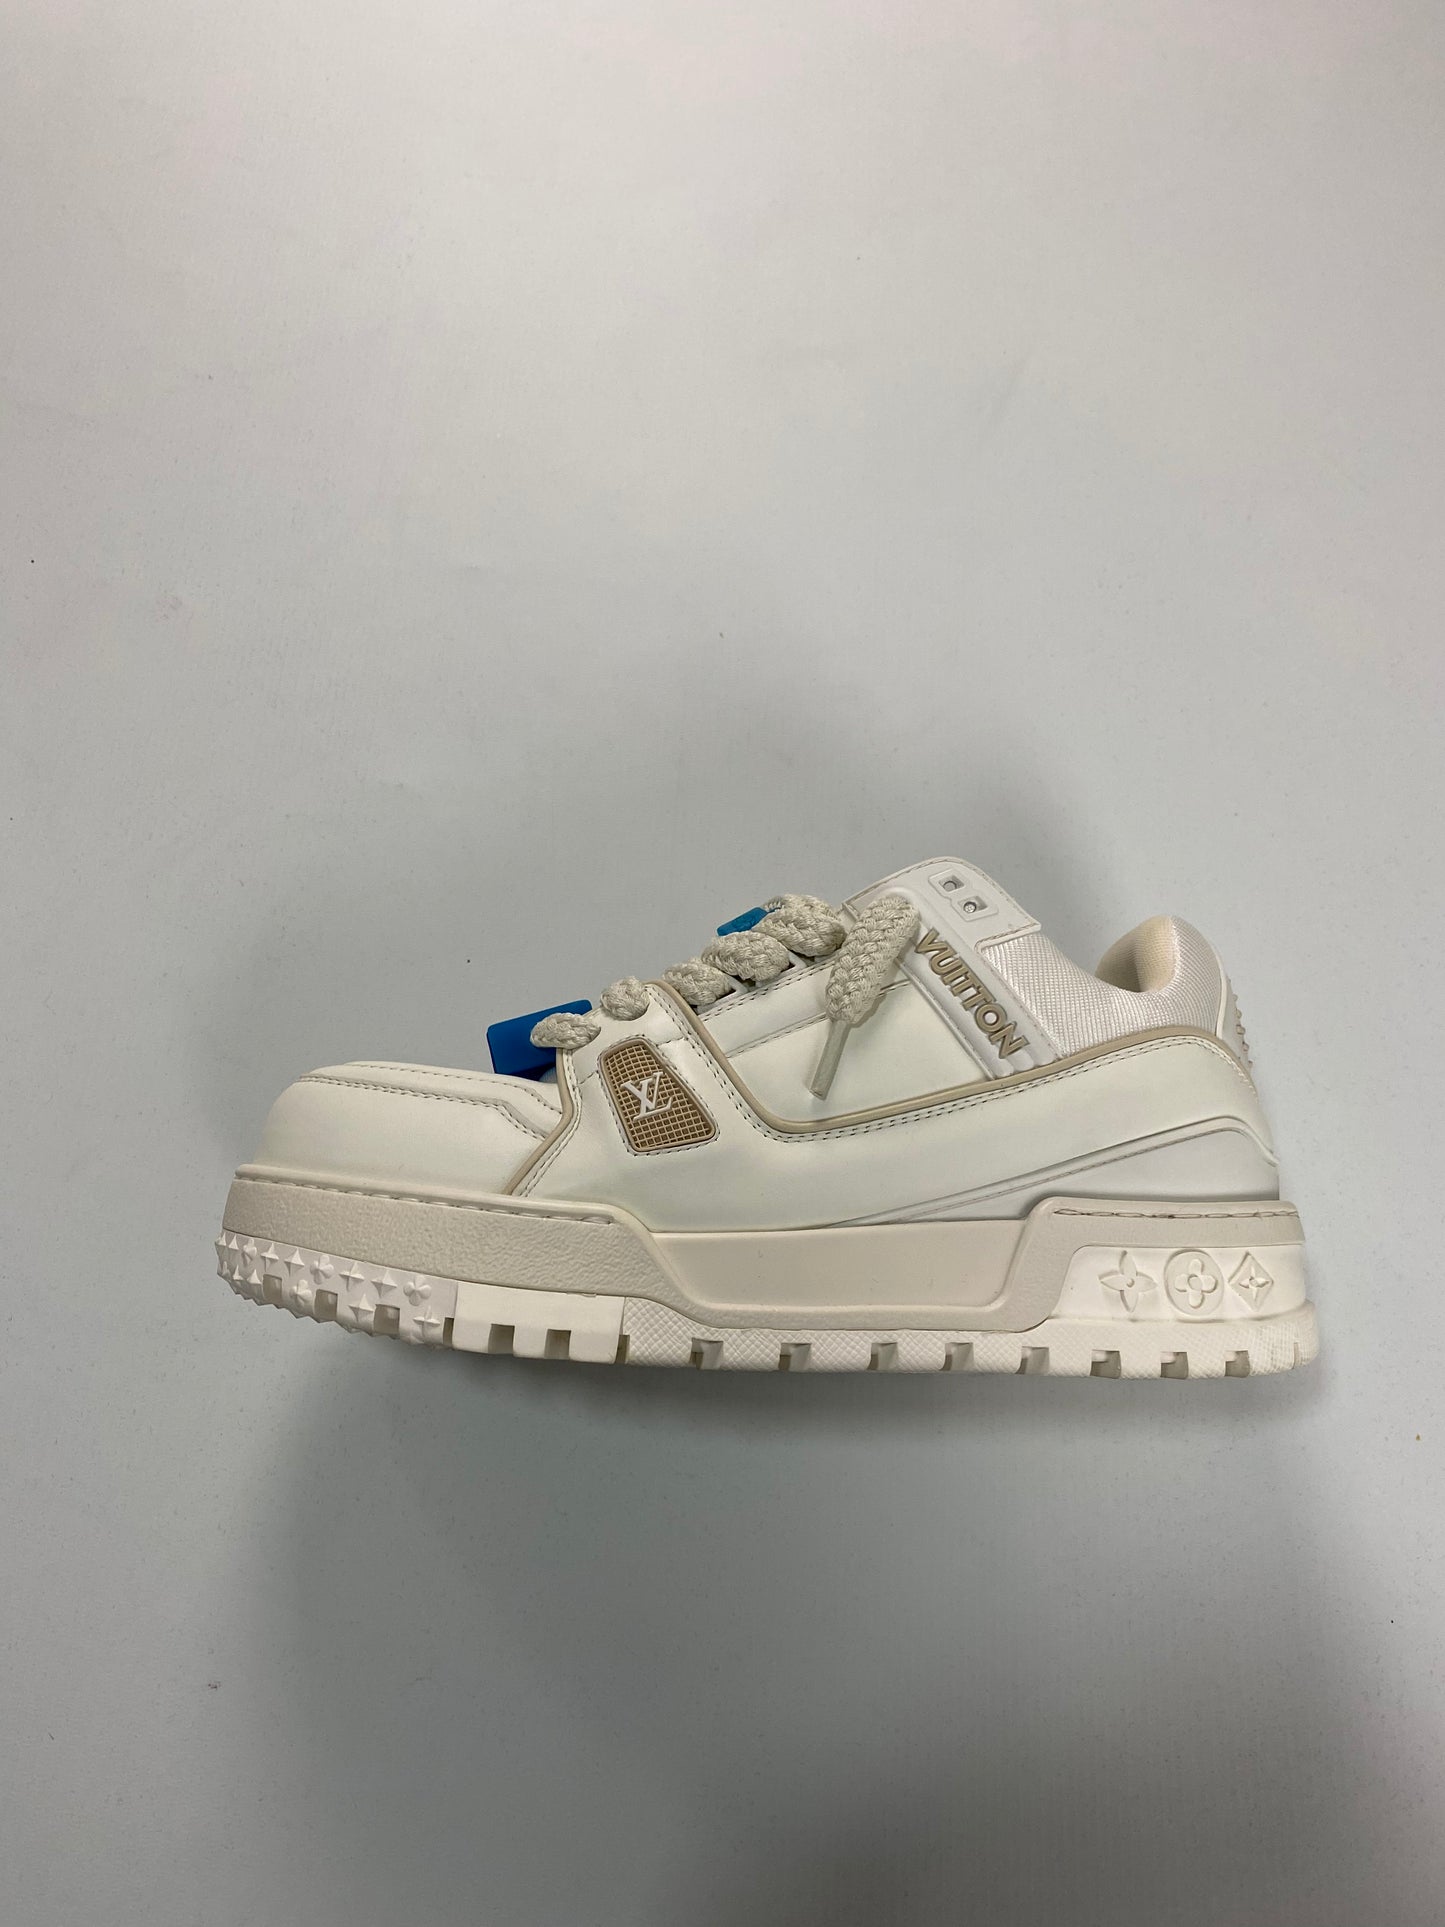 LV AW22 Maxi Trainer sneakers in all white SZ:LV7